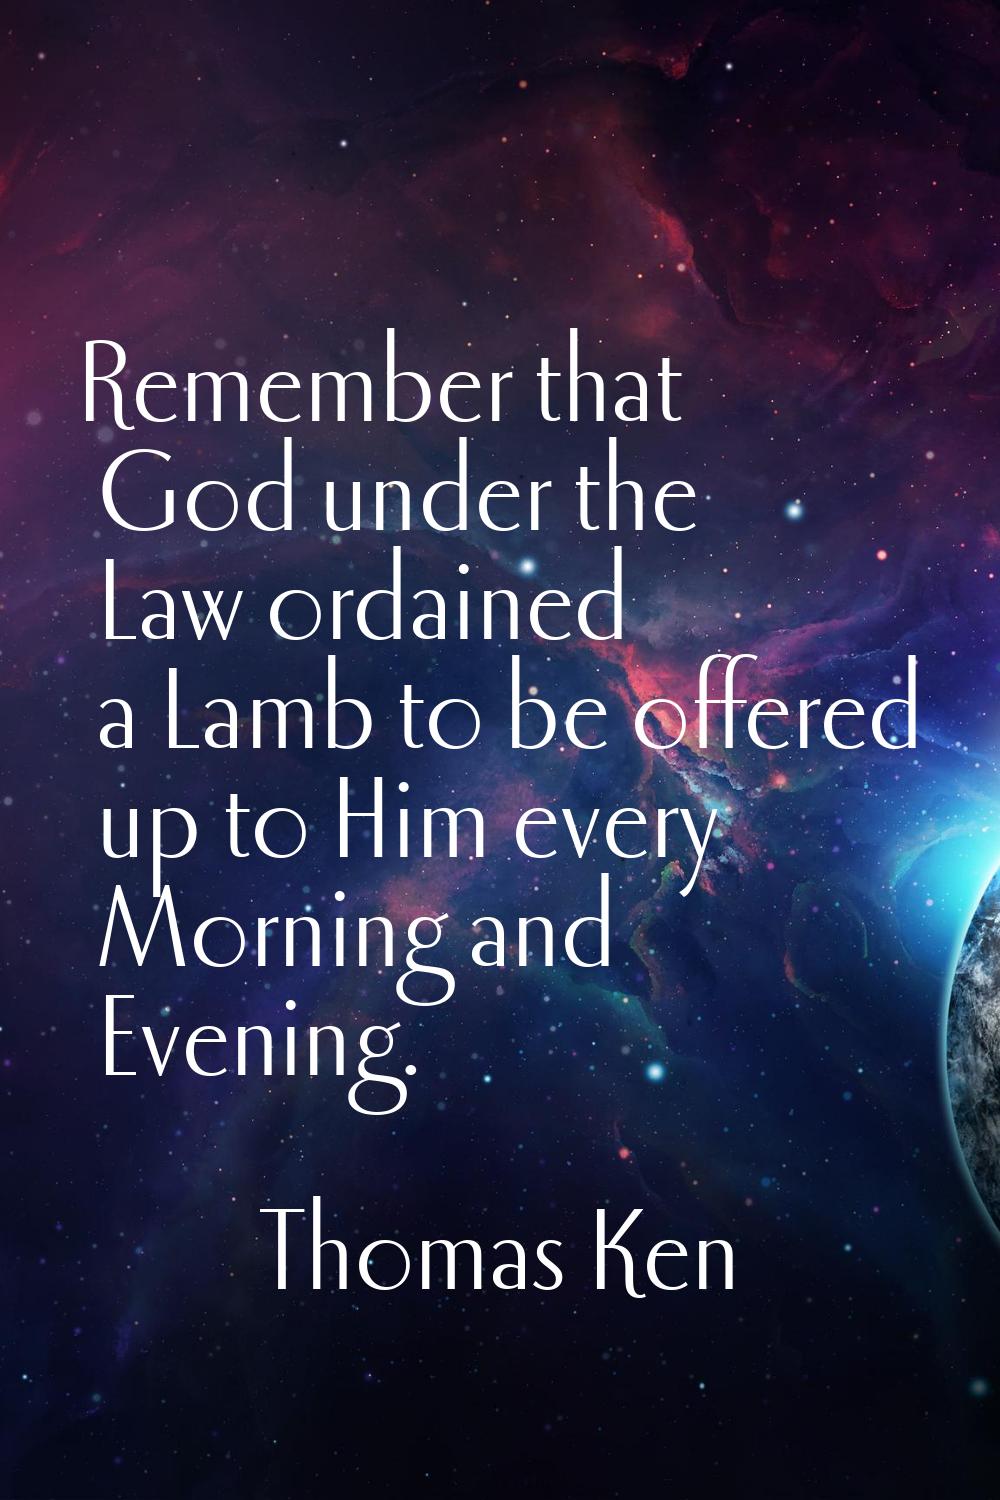 Remember that God under the Law ordained a Lamb to be offered up to Him every Morning and Evening.